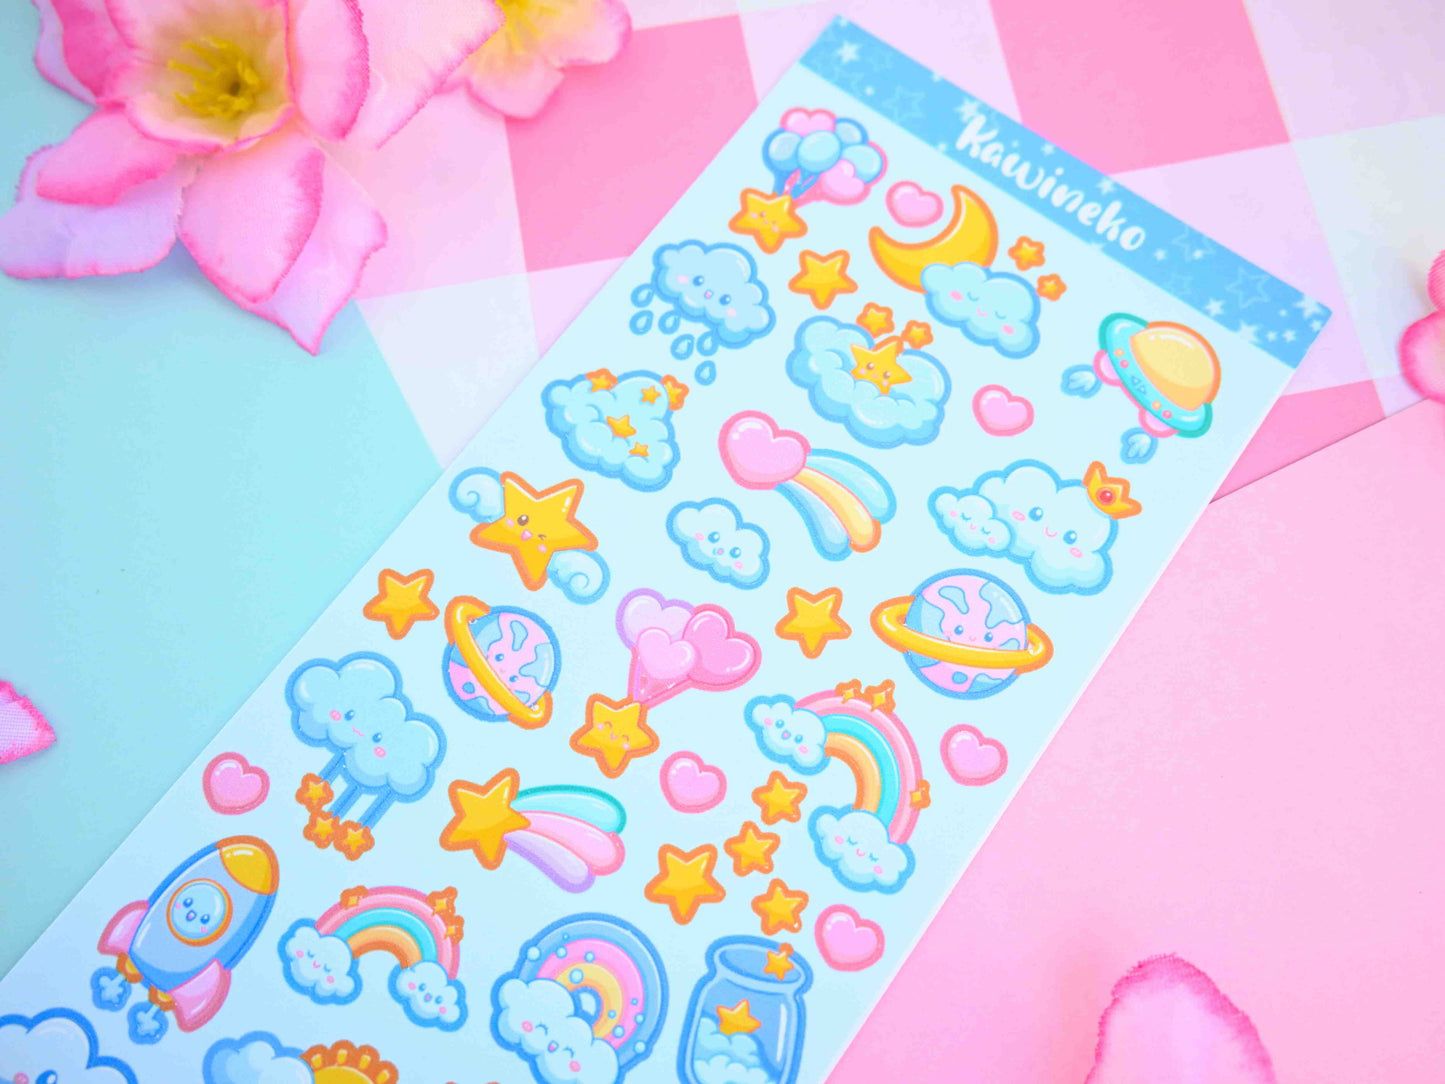 Cute Galaxy and space sticker sheets